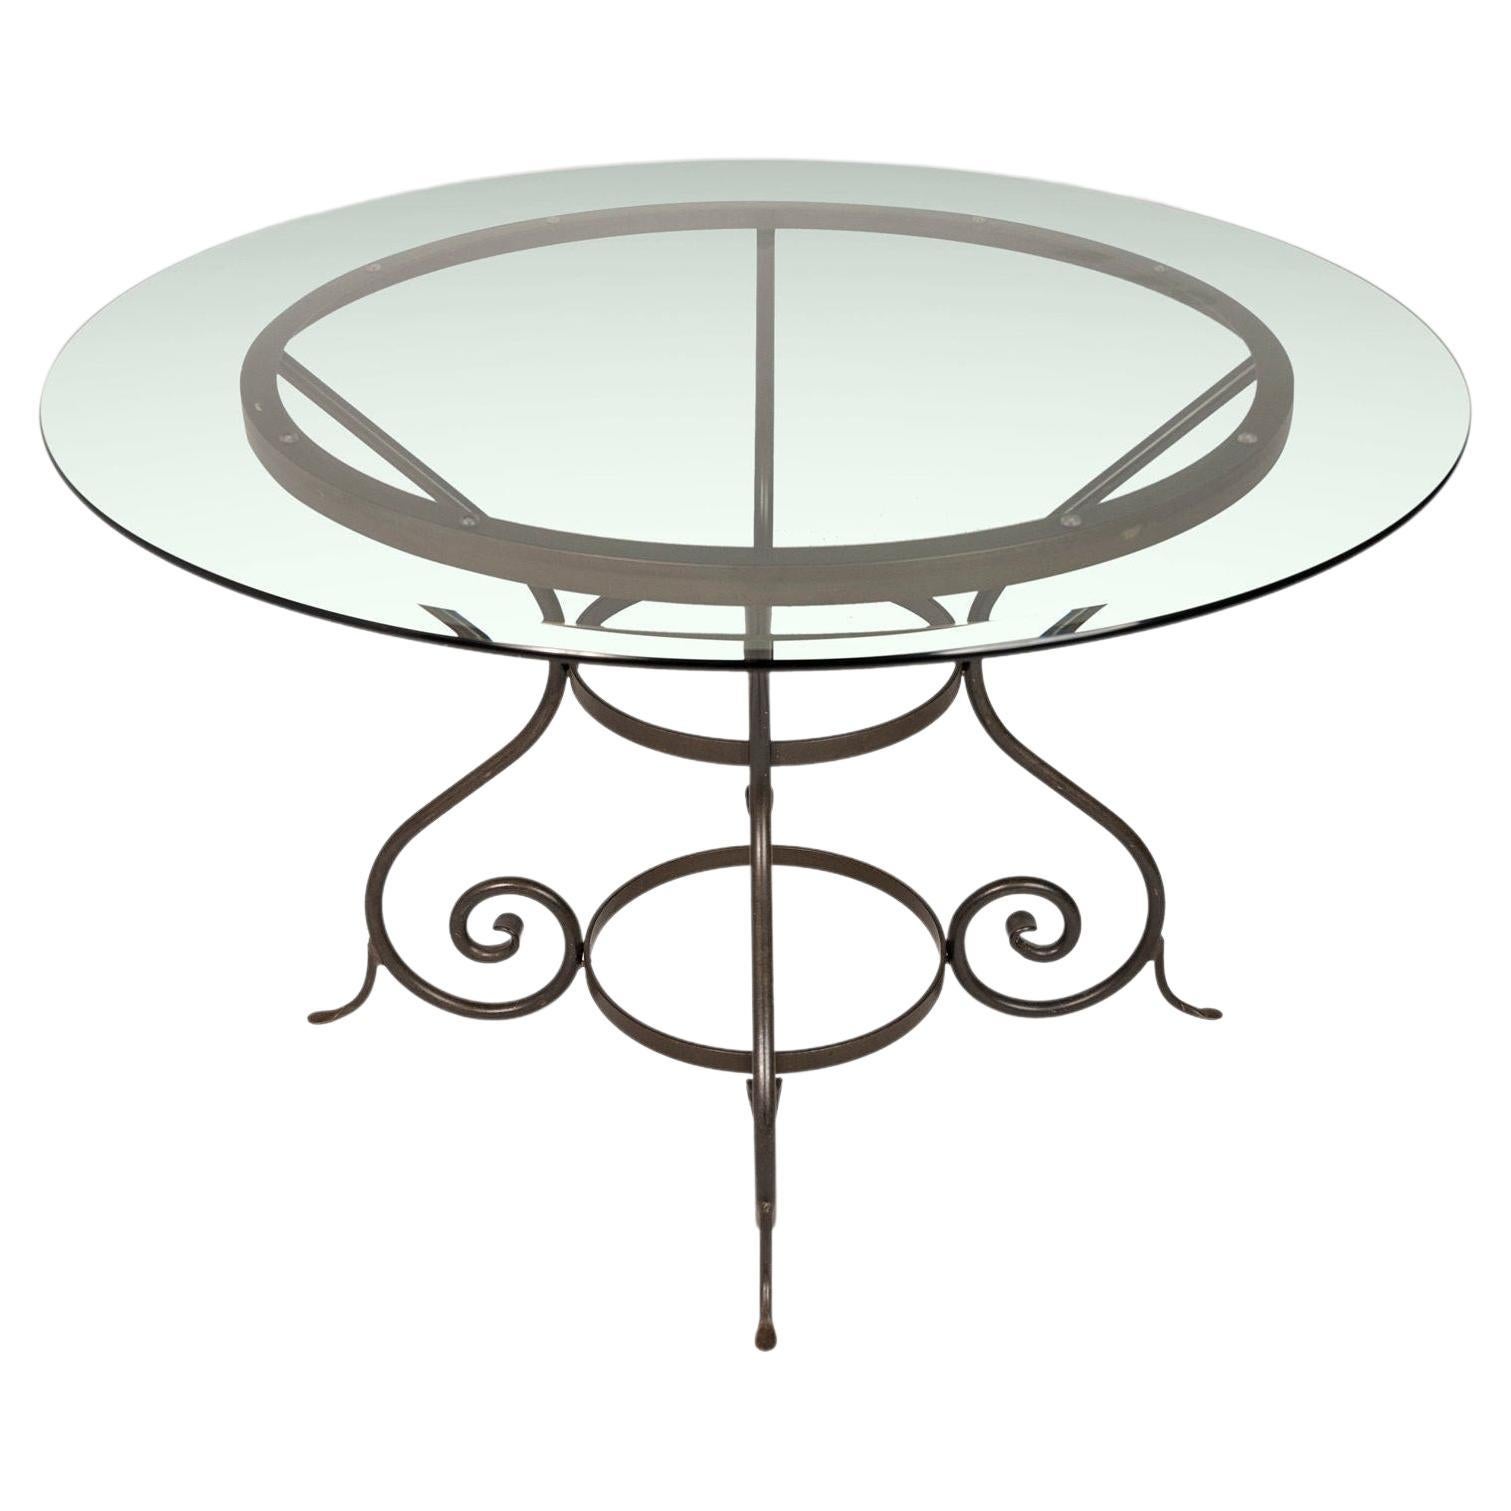 Charleston Forge 'Etrusche' Iron Glass Top Dining Table, USA, c. 2000's For Sale